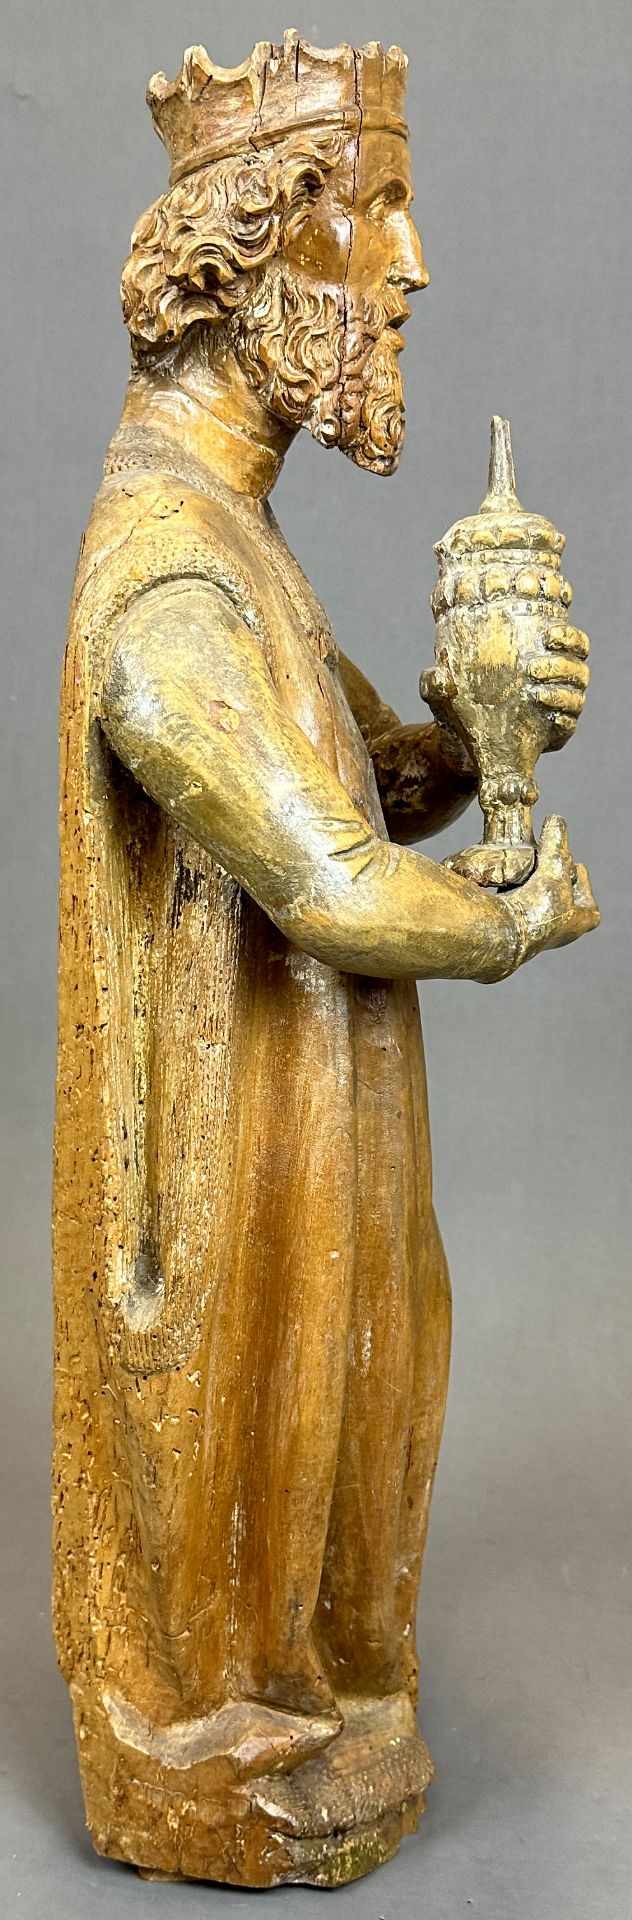 Wooden figure. St King from the Adoration. Around 1500. South Germany. - Image 4 of 11